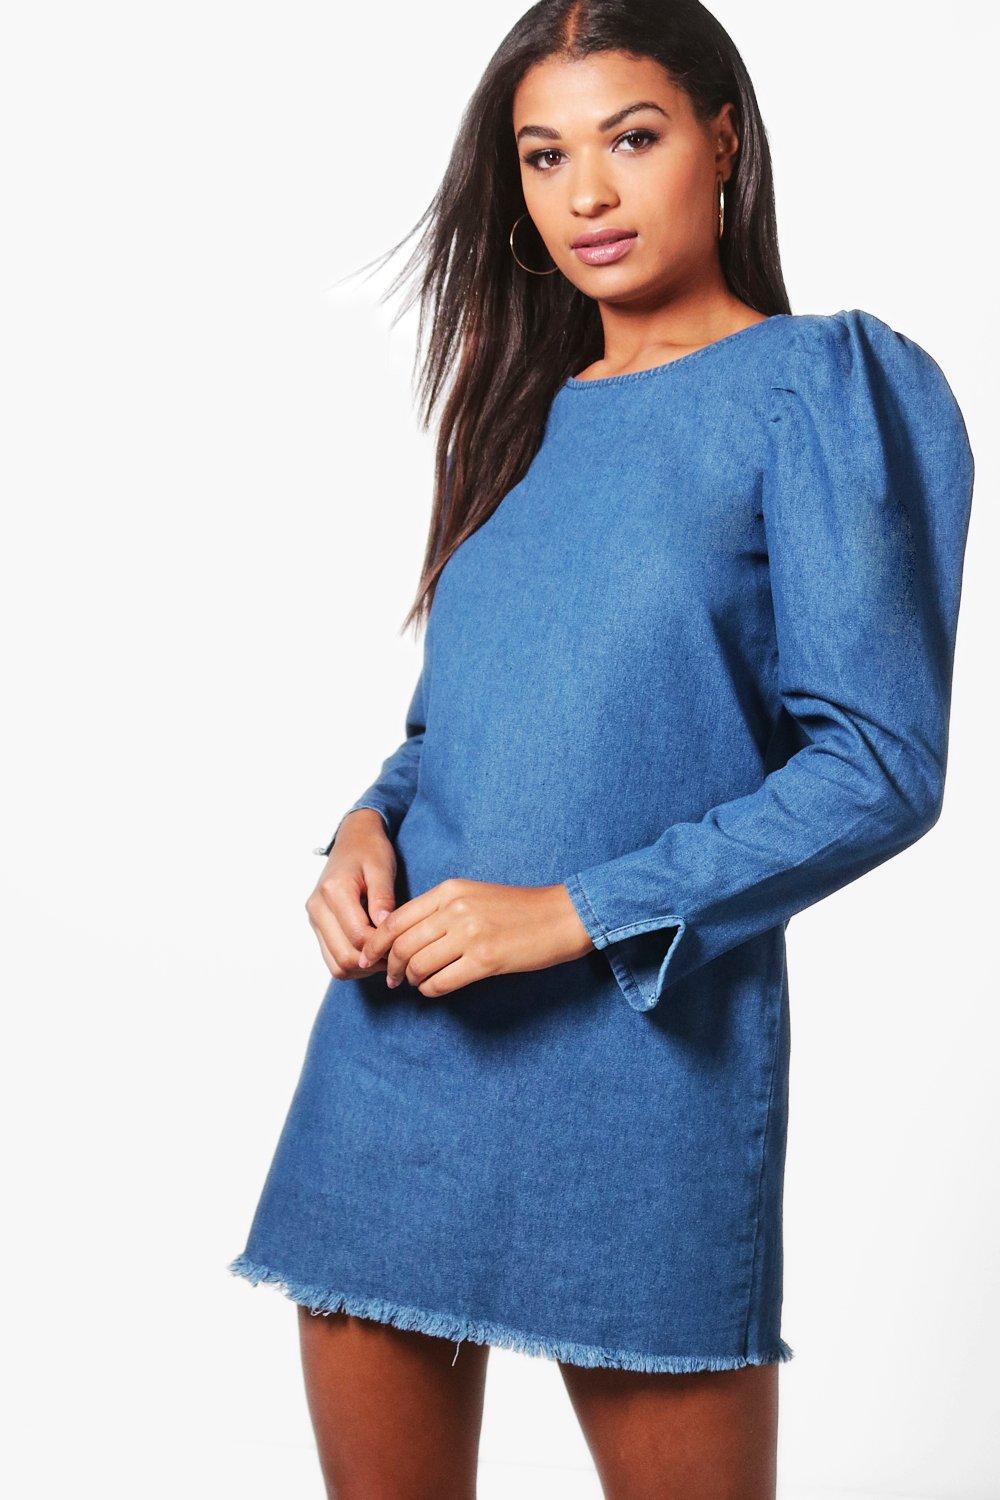 denim dress with puffy sleeves